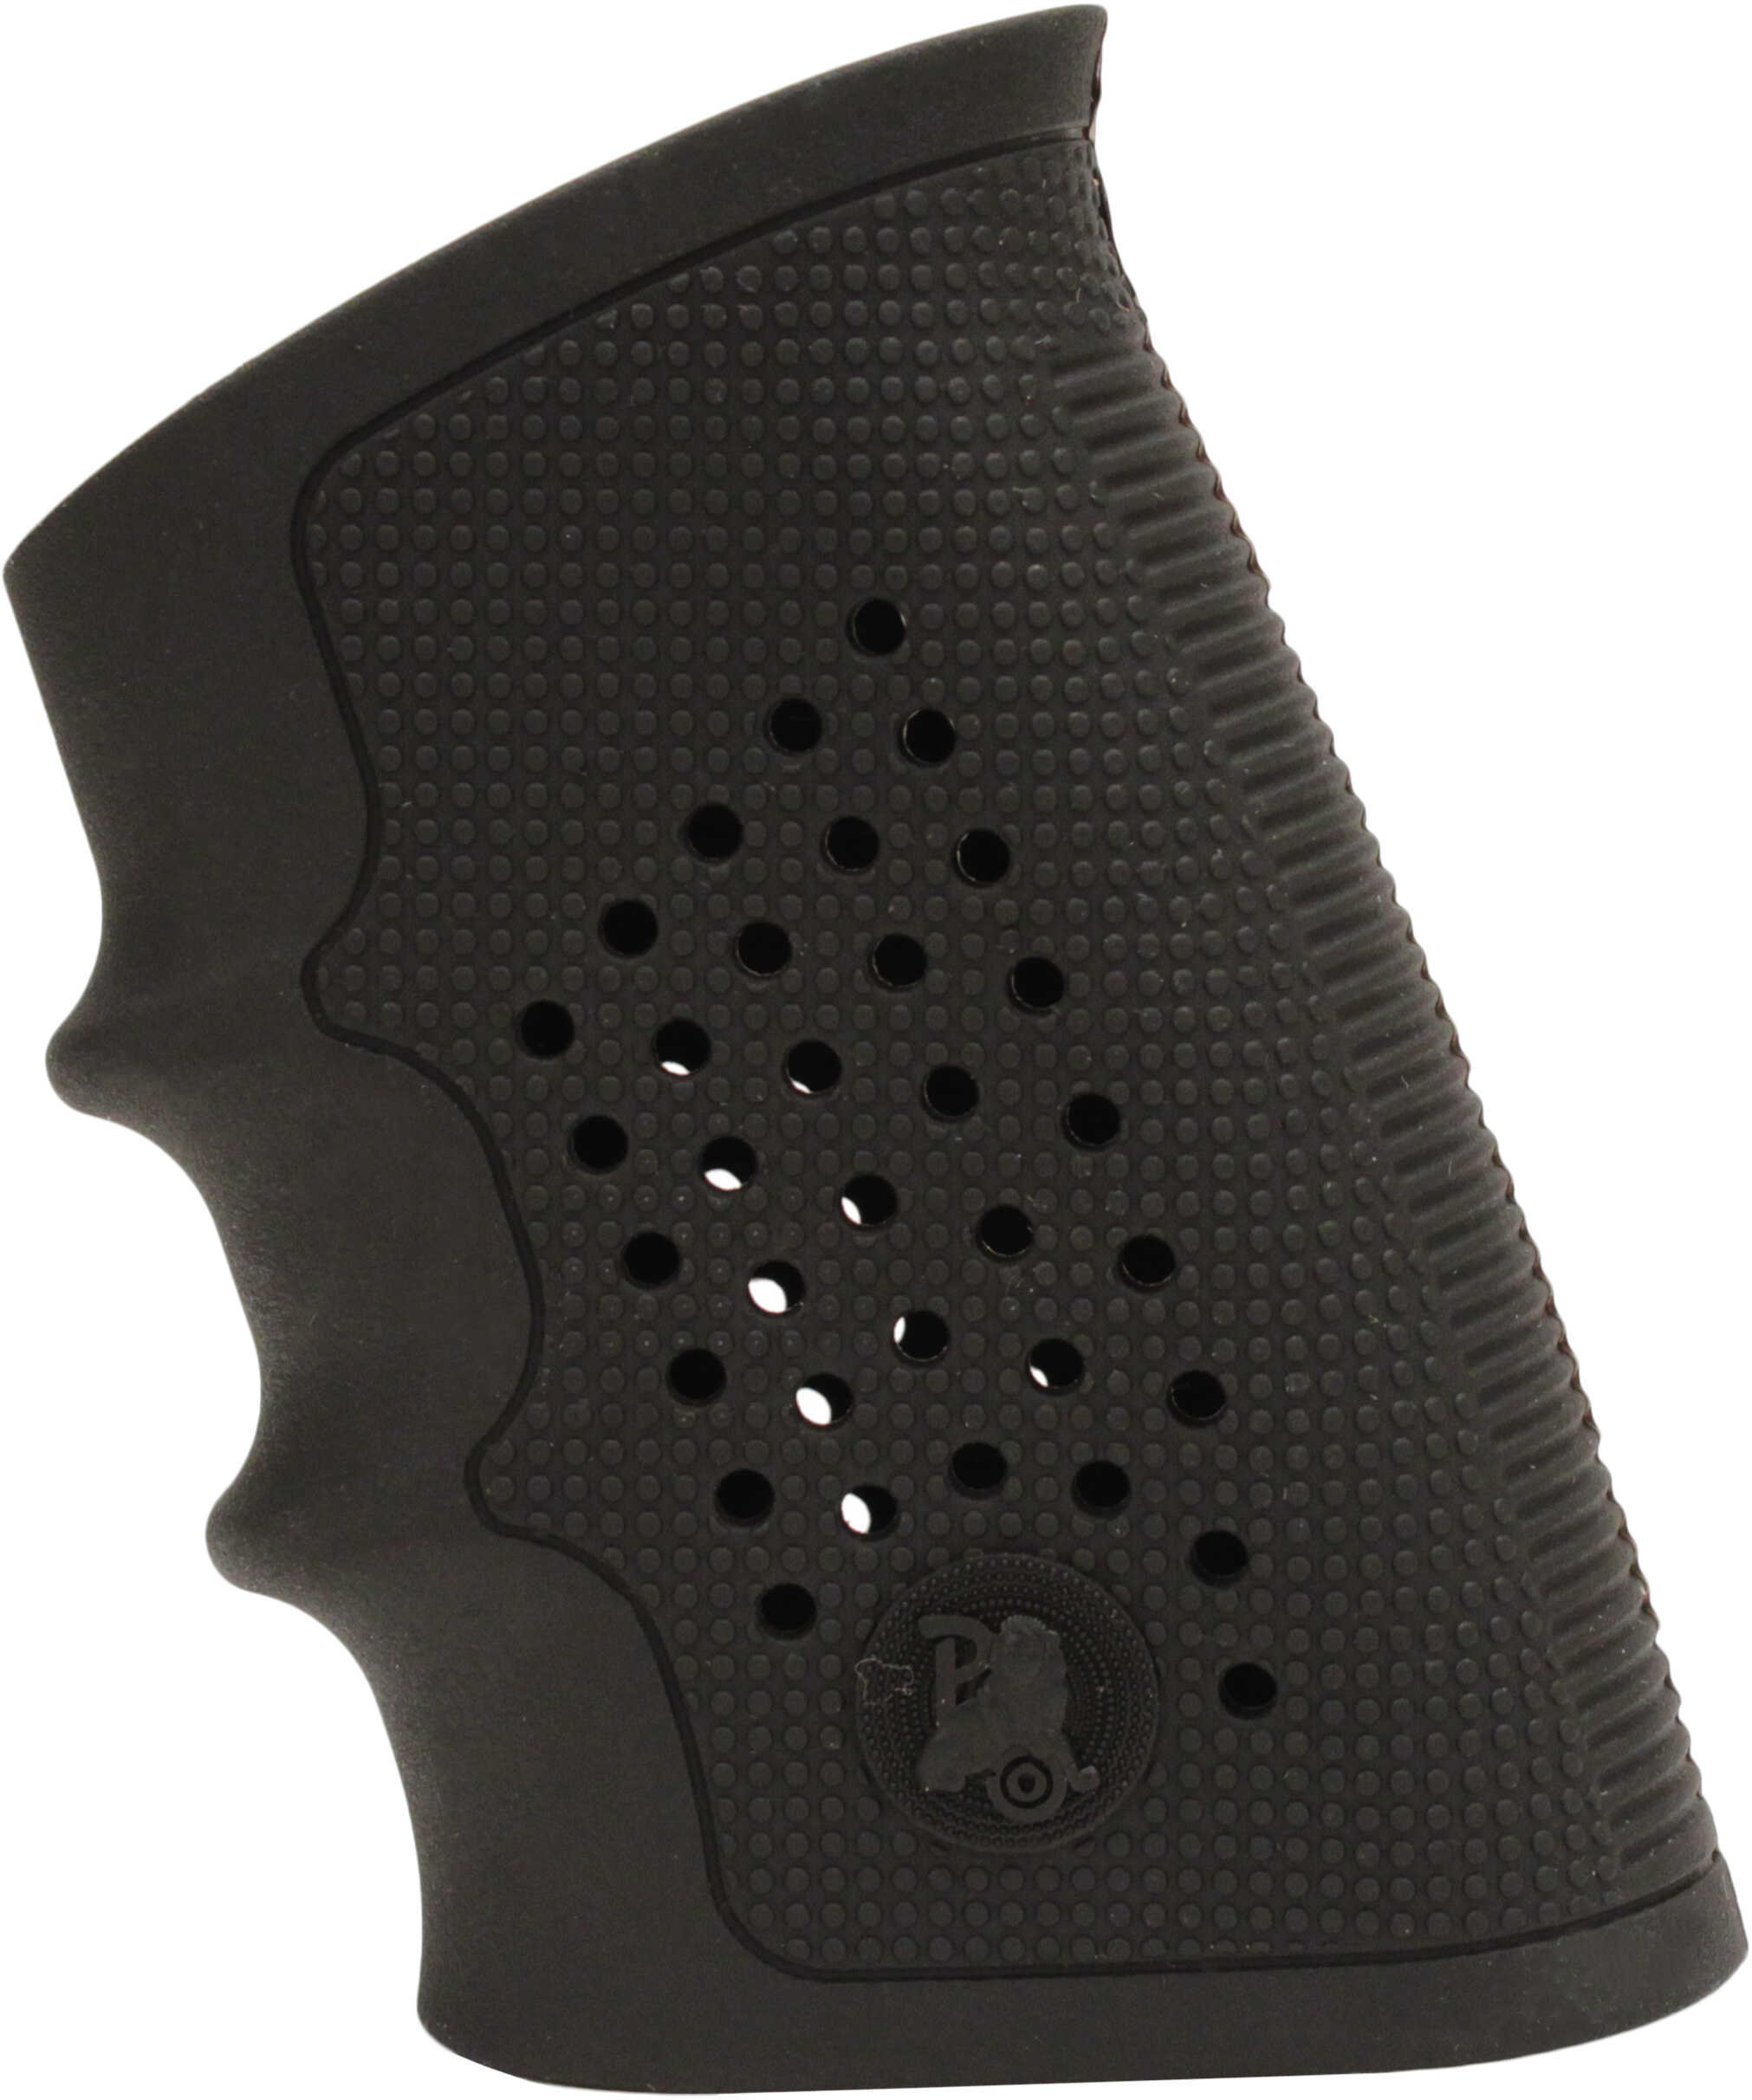 Pachmayr Tactical Grip Glove "Ruger SR9